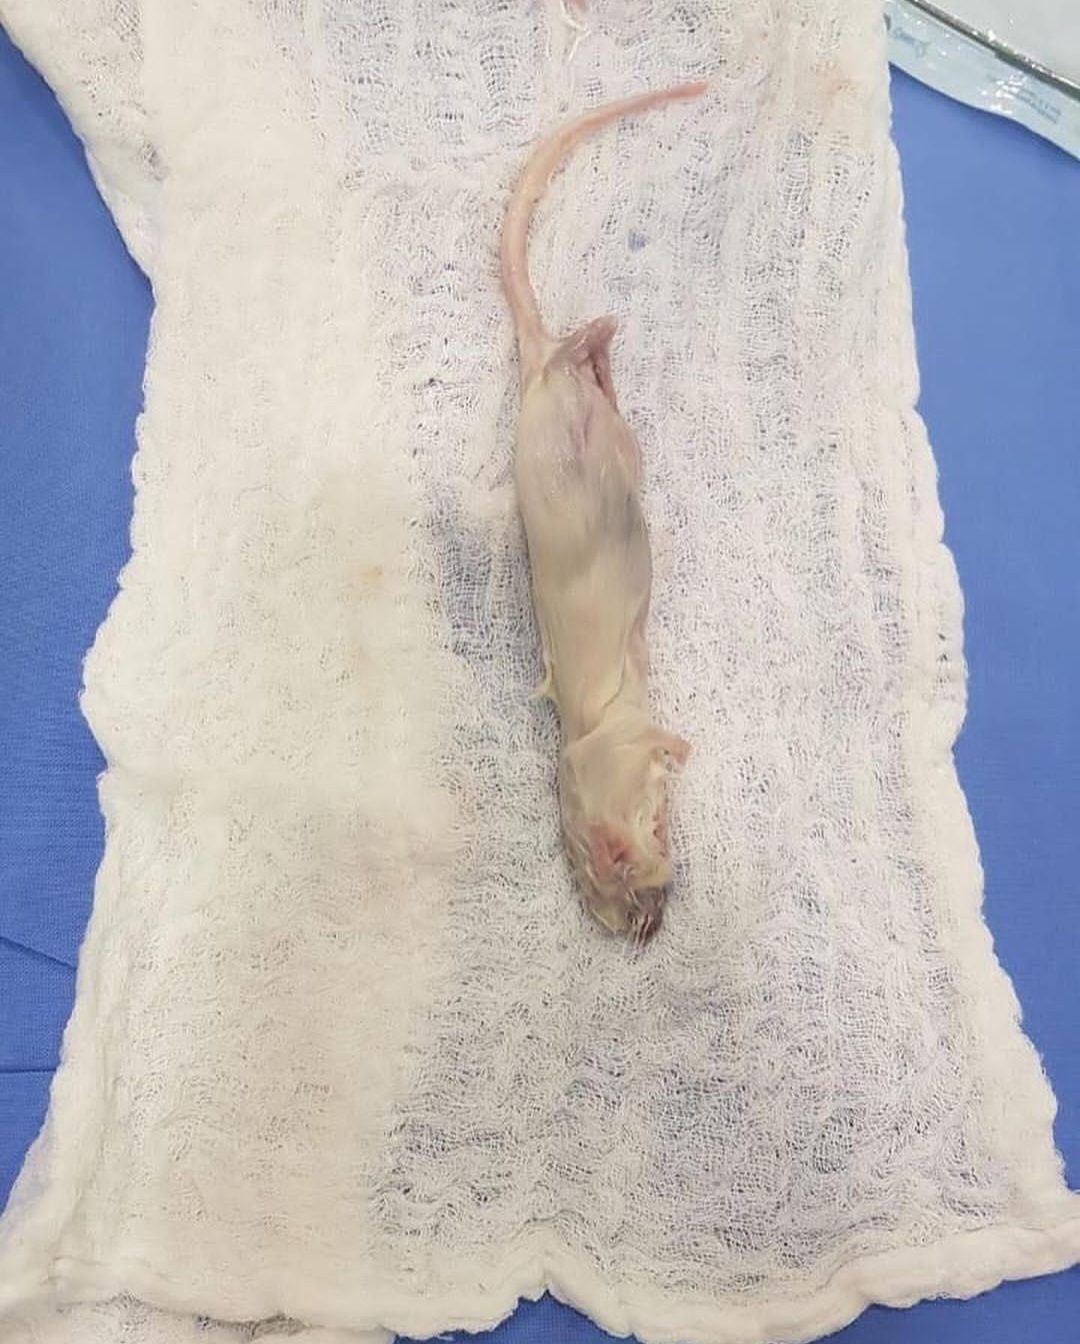 Whole mouse dug out of patient